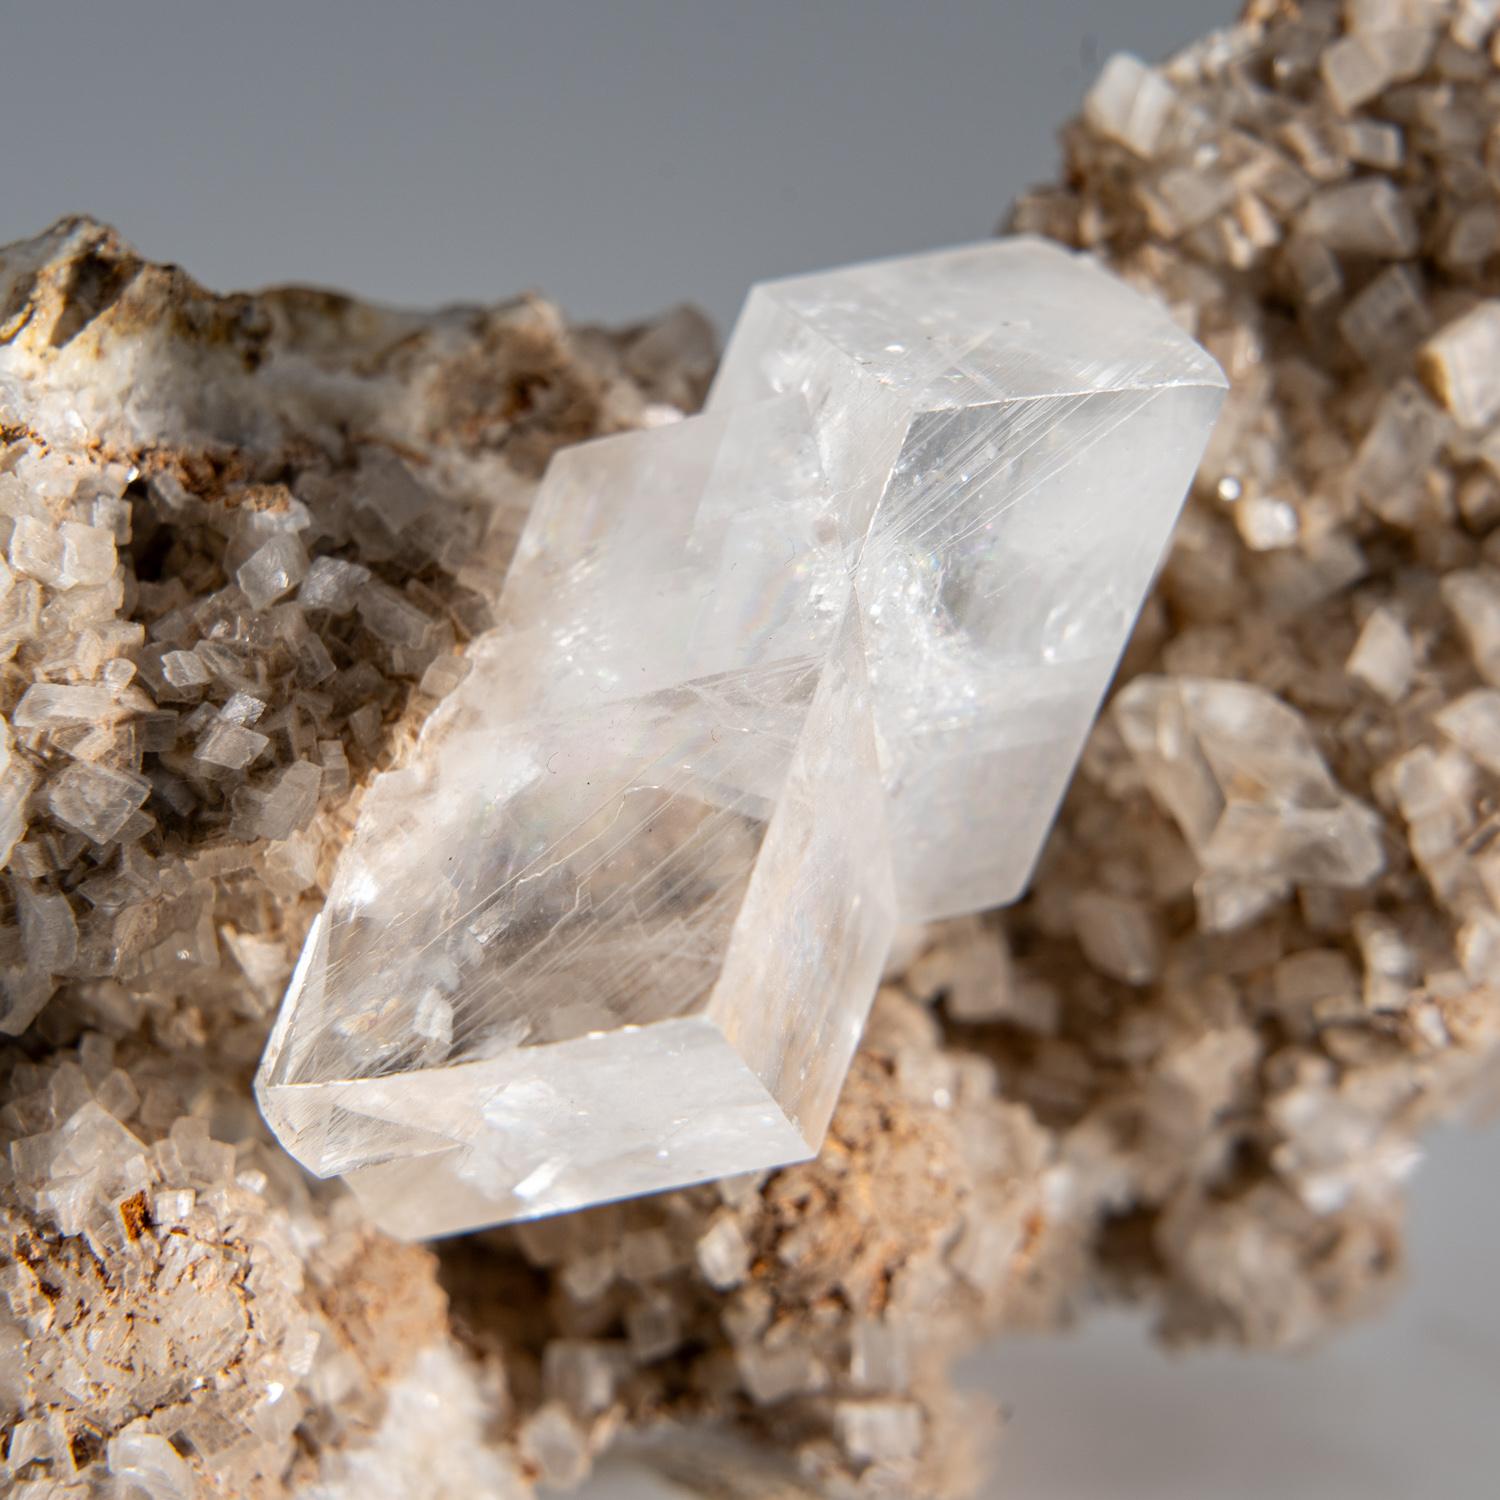 From Asturreta Quarry, Eugui District, Navarra Province, Spain

Transparent colorless dolomite crystals with glassy crystal surfaces on matrix. Dolomite is part of the carbonate class of minerals and is know as a calcium magnesium